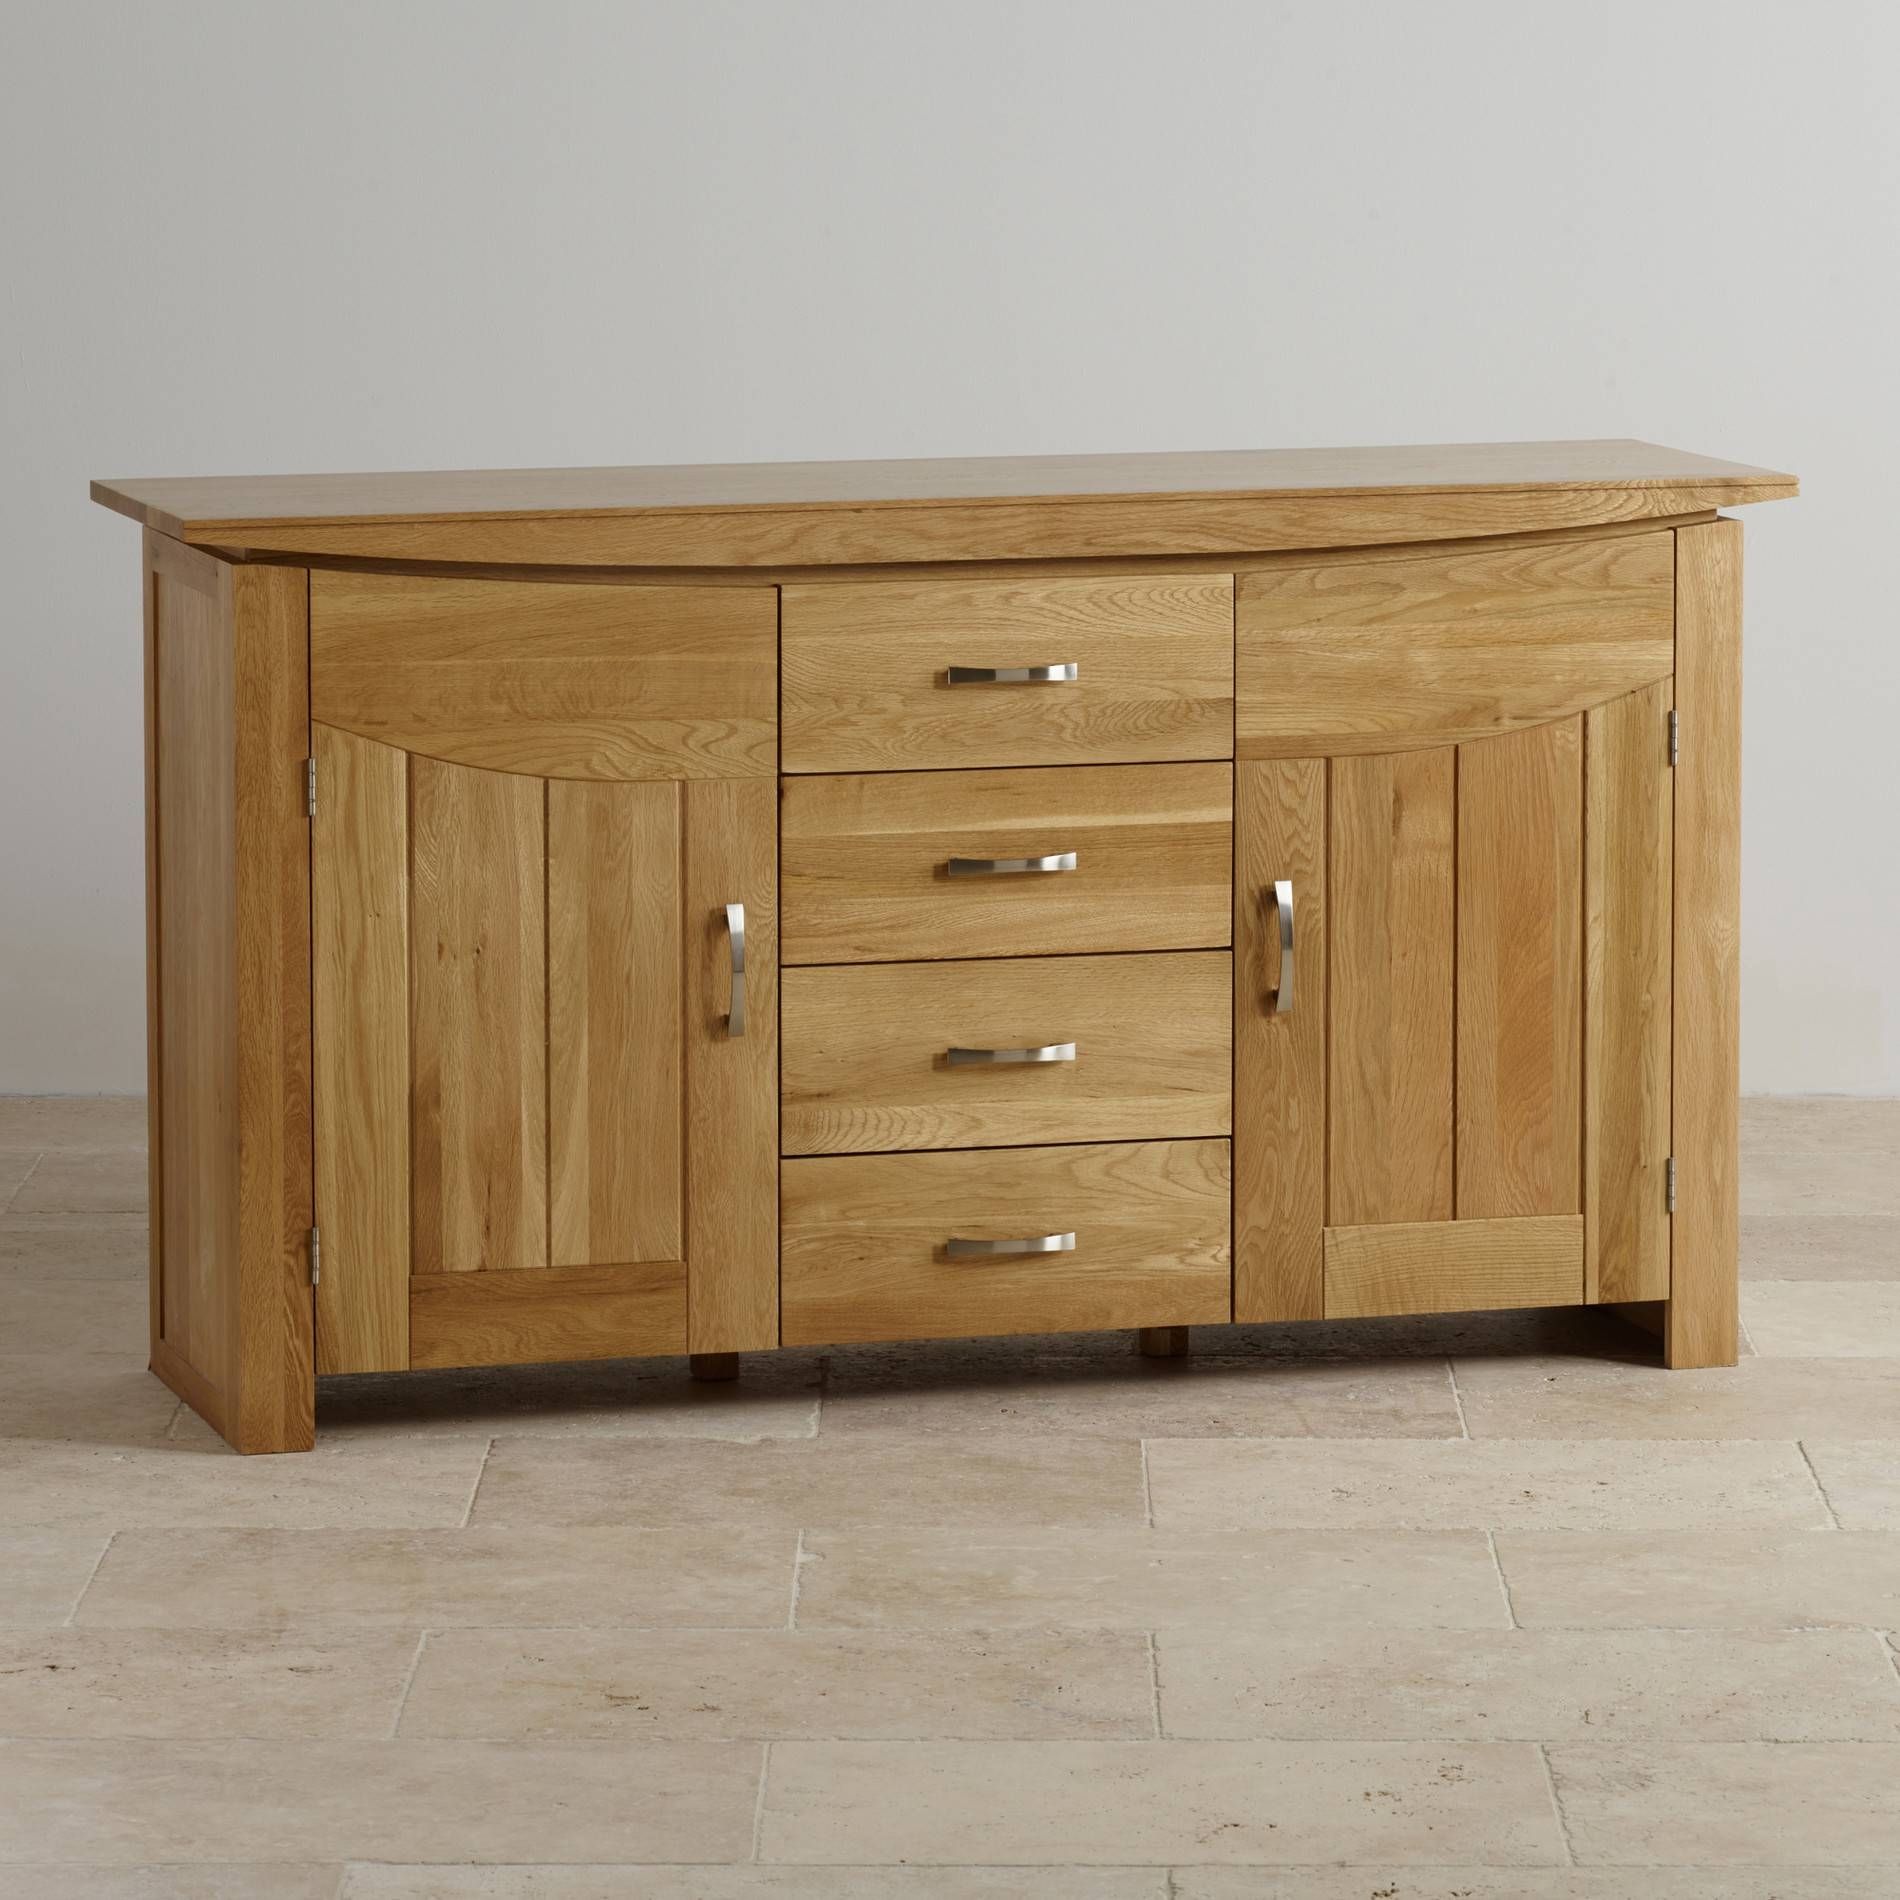 Sideboards For Versatile Uses – Furnitureanddecors/decor In Newest Solid Oak Sideboards (View 12 of 15)